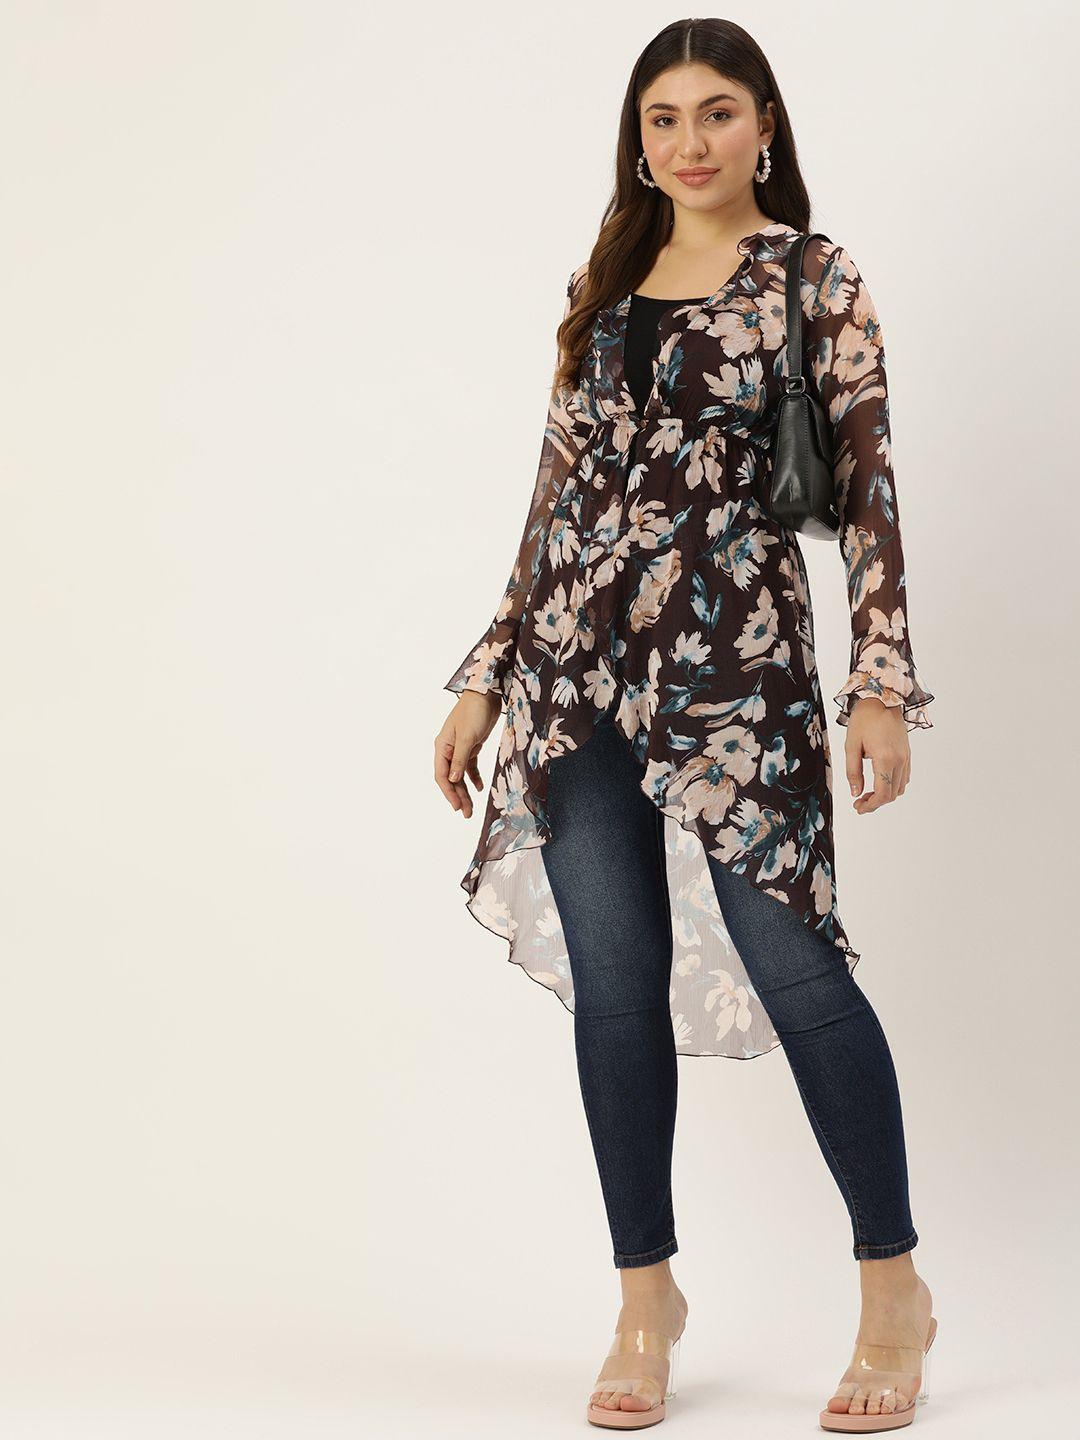 roving mode floral printed longline button shrug with ruffles